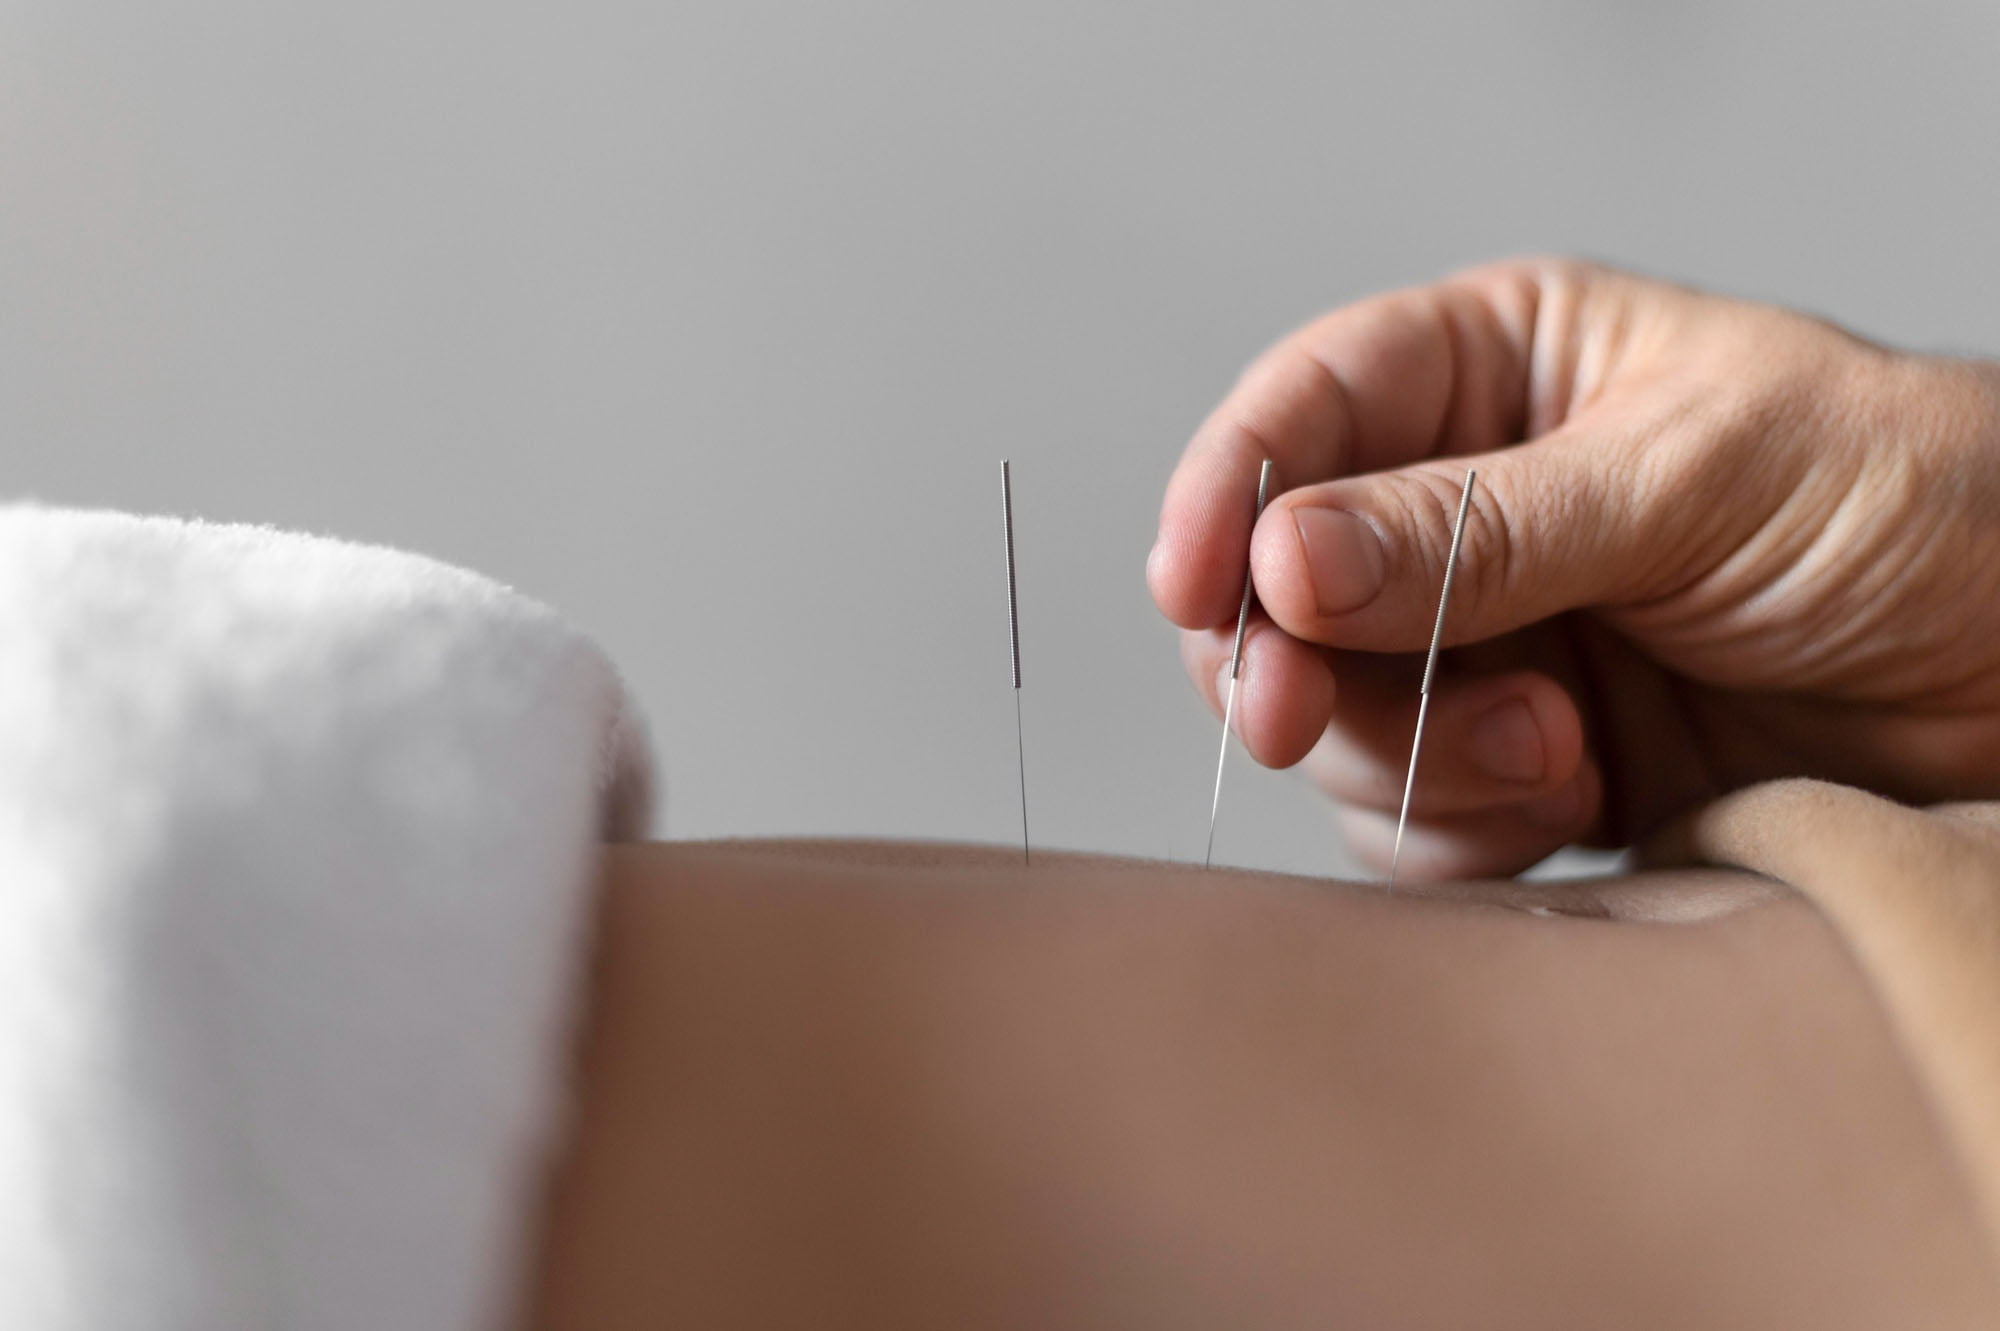 acupuncture and morphine